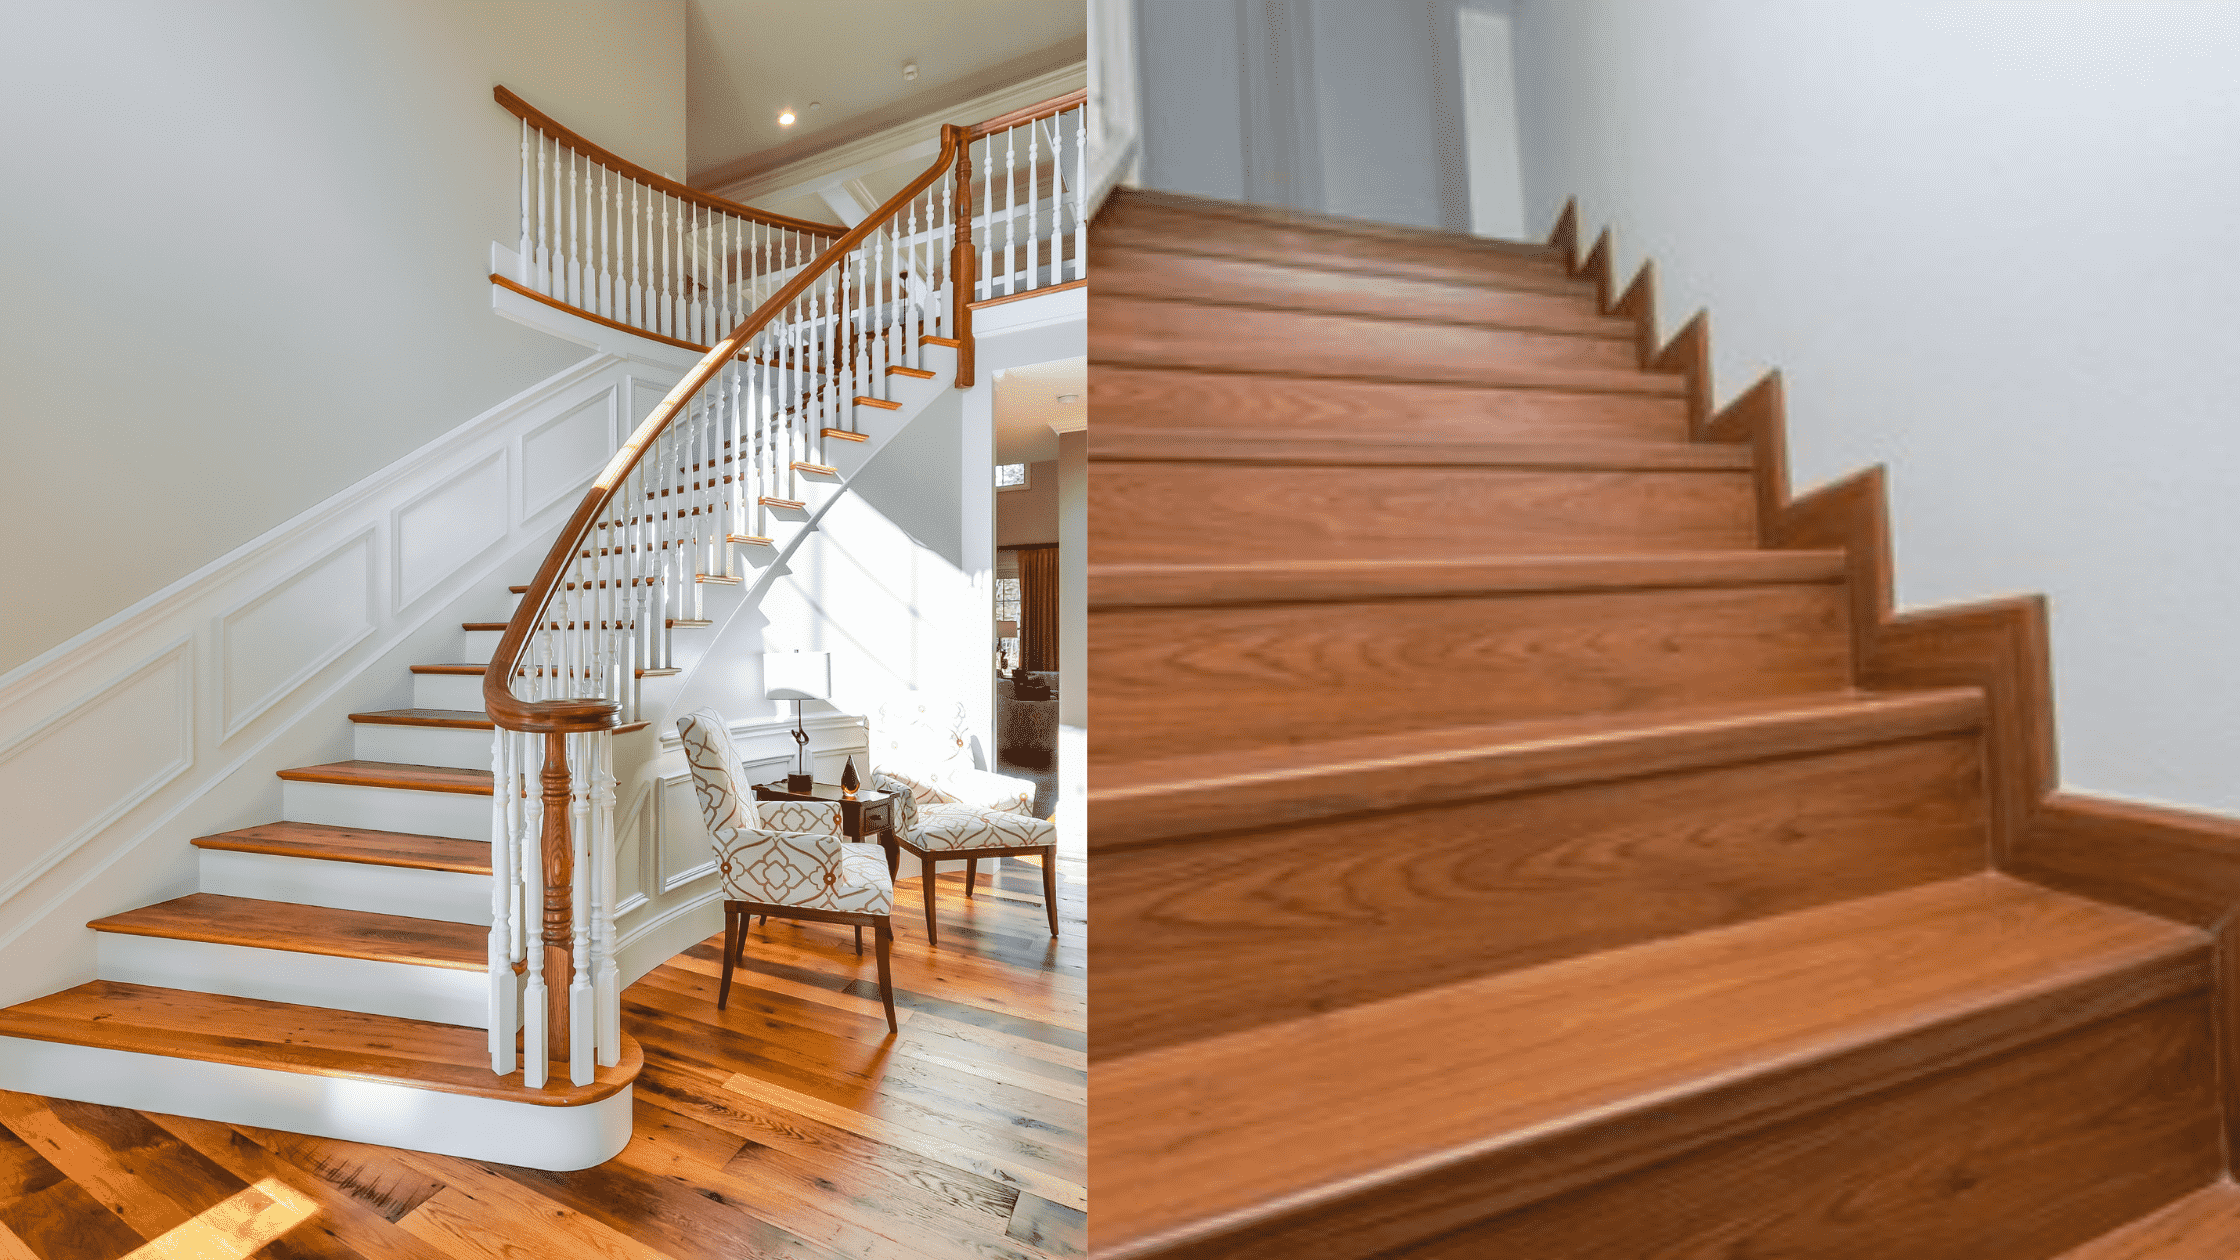 Laminate Stairs All You Want To Know, Do You Need A Permit To Install Laminate Flooring On Stairs